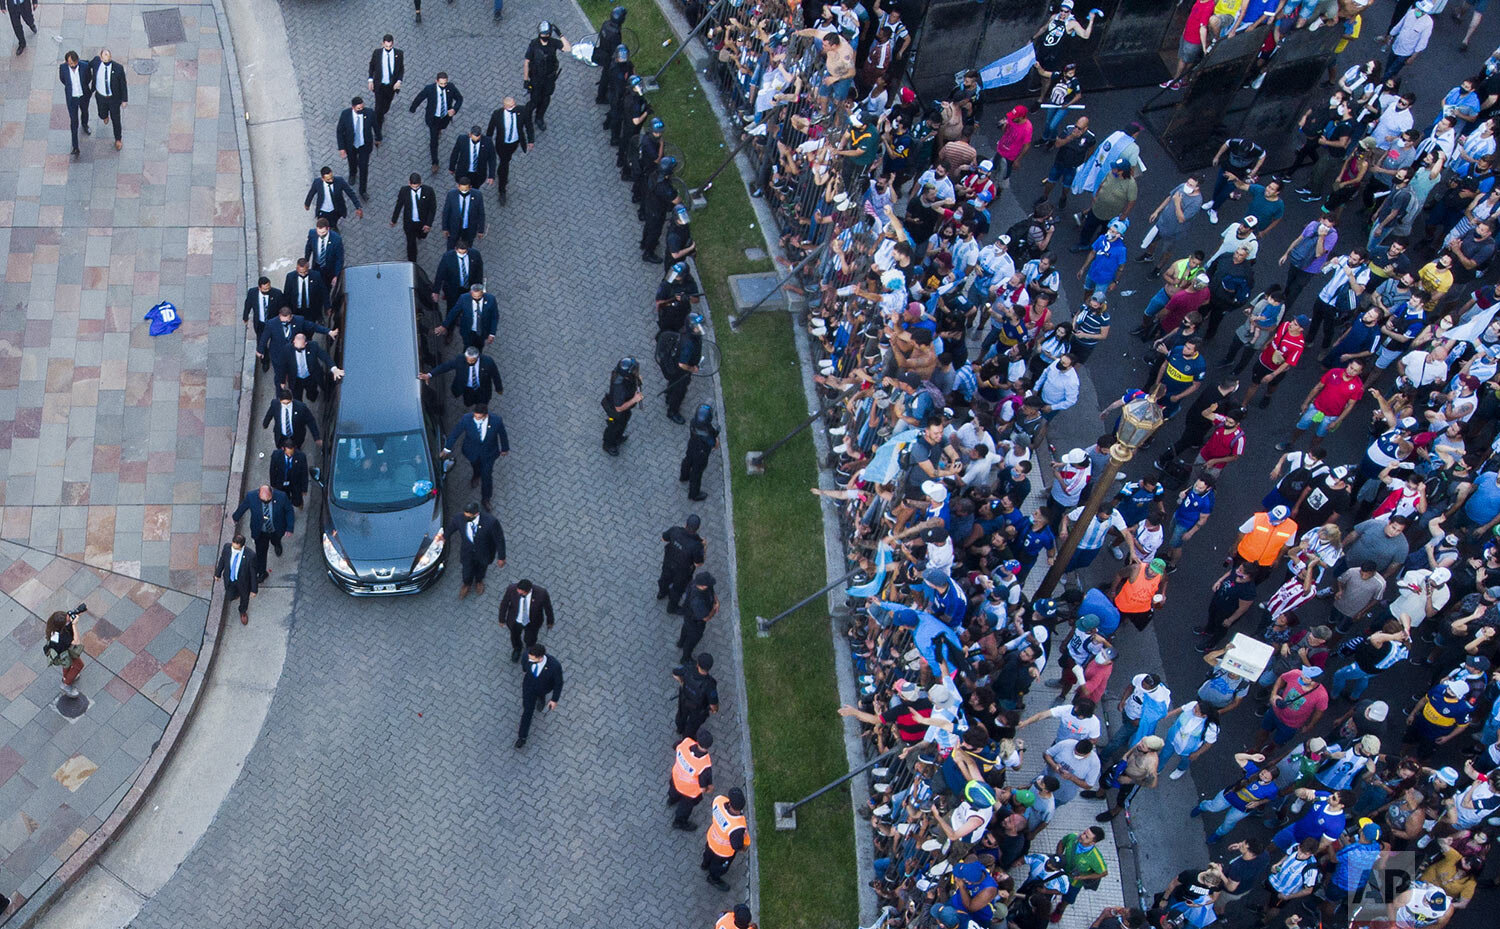  The hearse transporting the casket that contains the remains of Diego Maradona leaves Government House in Buenos Aires, Argentina, Thursday, Nov. 26, 2020. (AP Photo/Mario De Fina) 